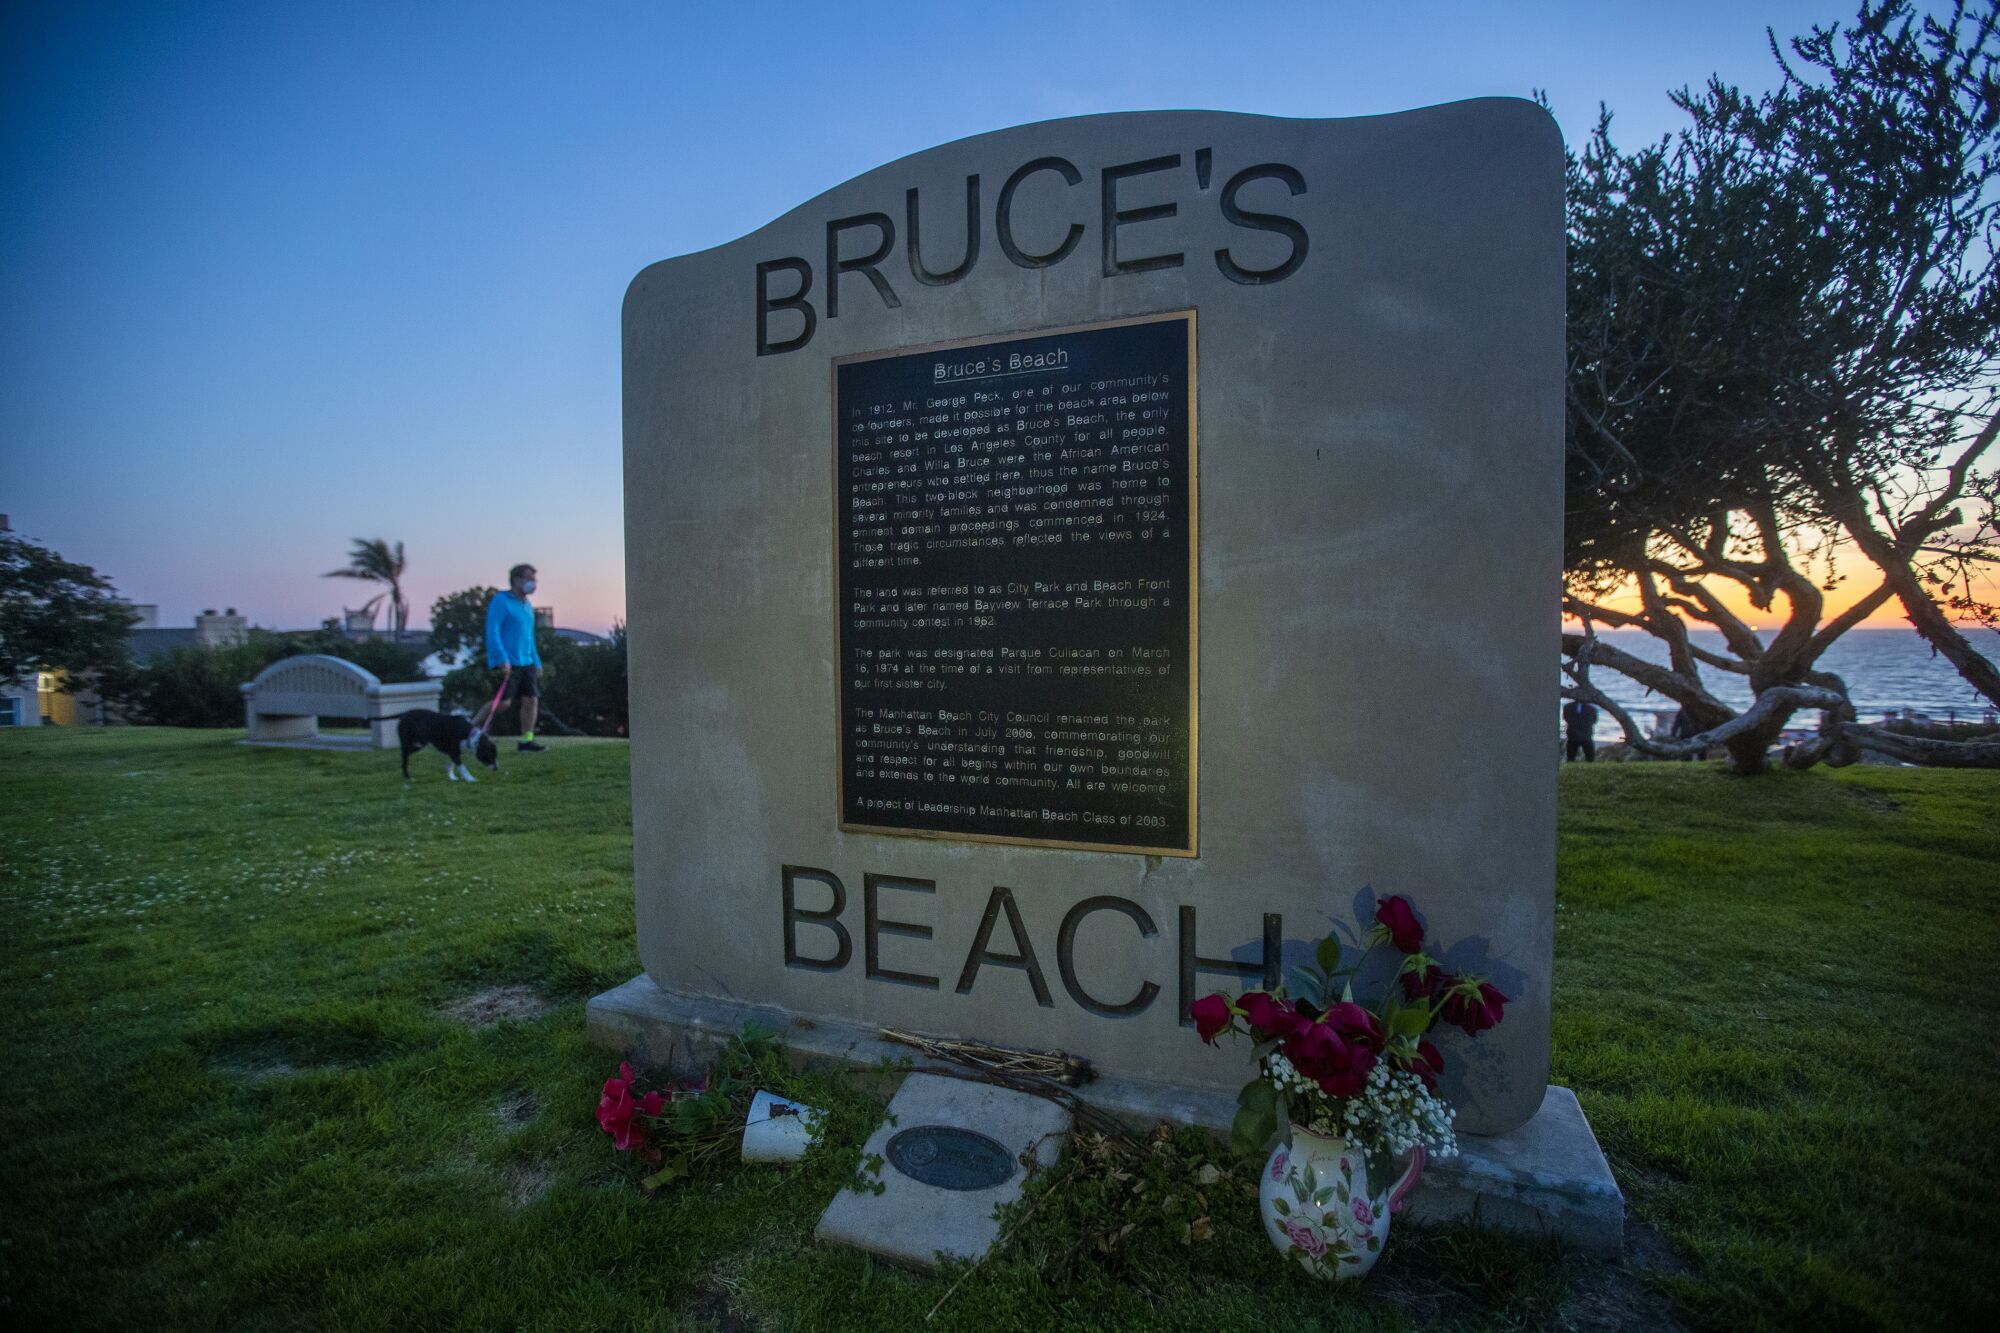 Bruce's Beach was once one of the most prominent Black-owned resorts by the sea.